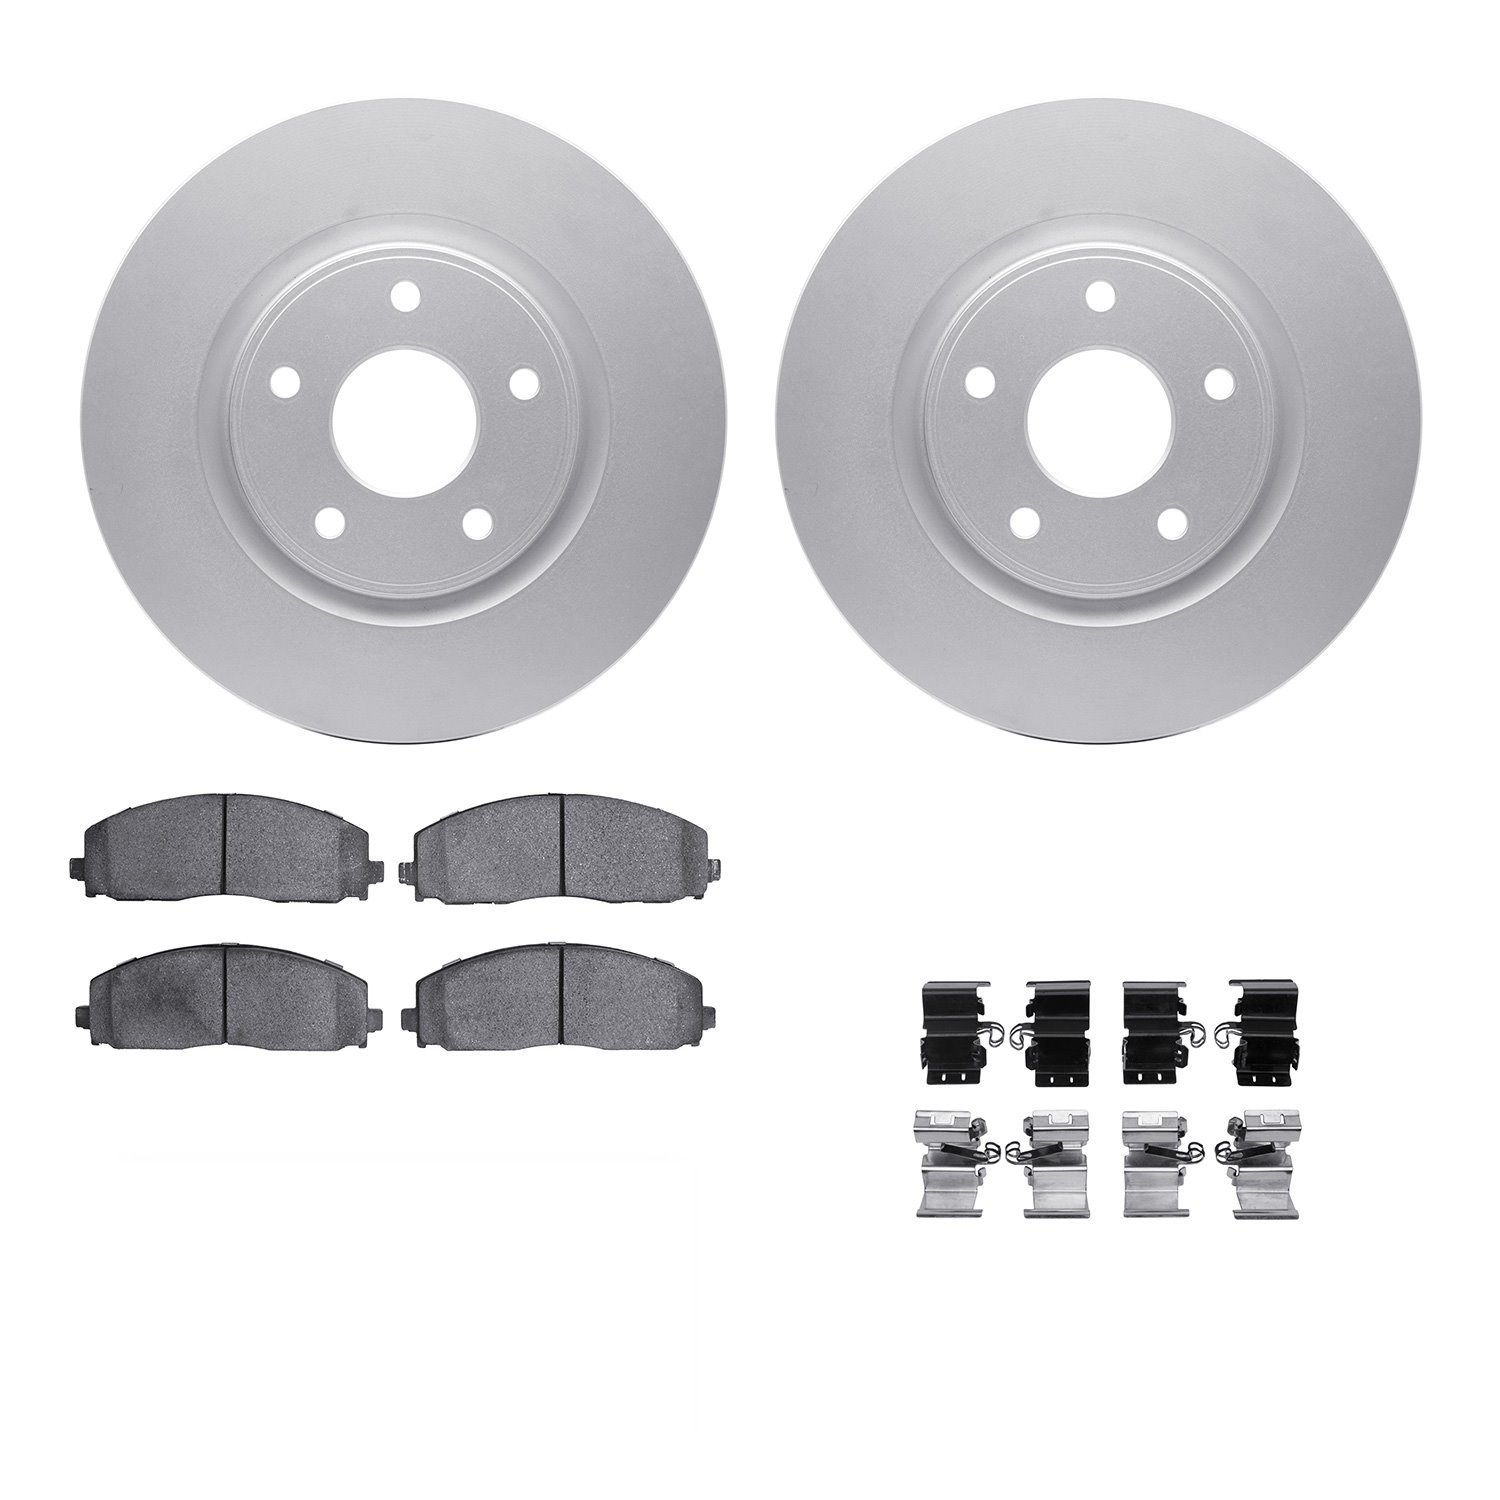 4312-40038 Geospec Brake Rotors with 3000-Series Ceramic Brake Pads & Hardware, Fits Select Multiple Makes/Models, Position: Fro